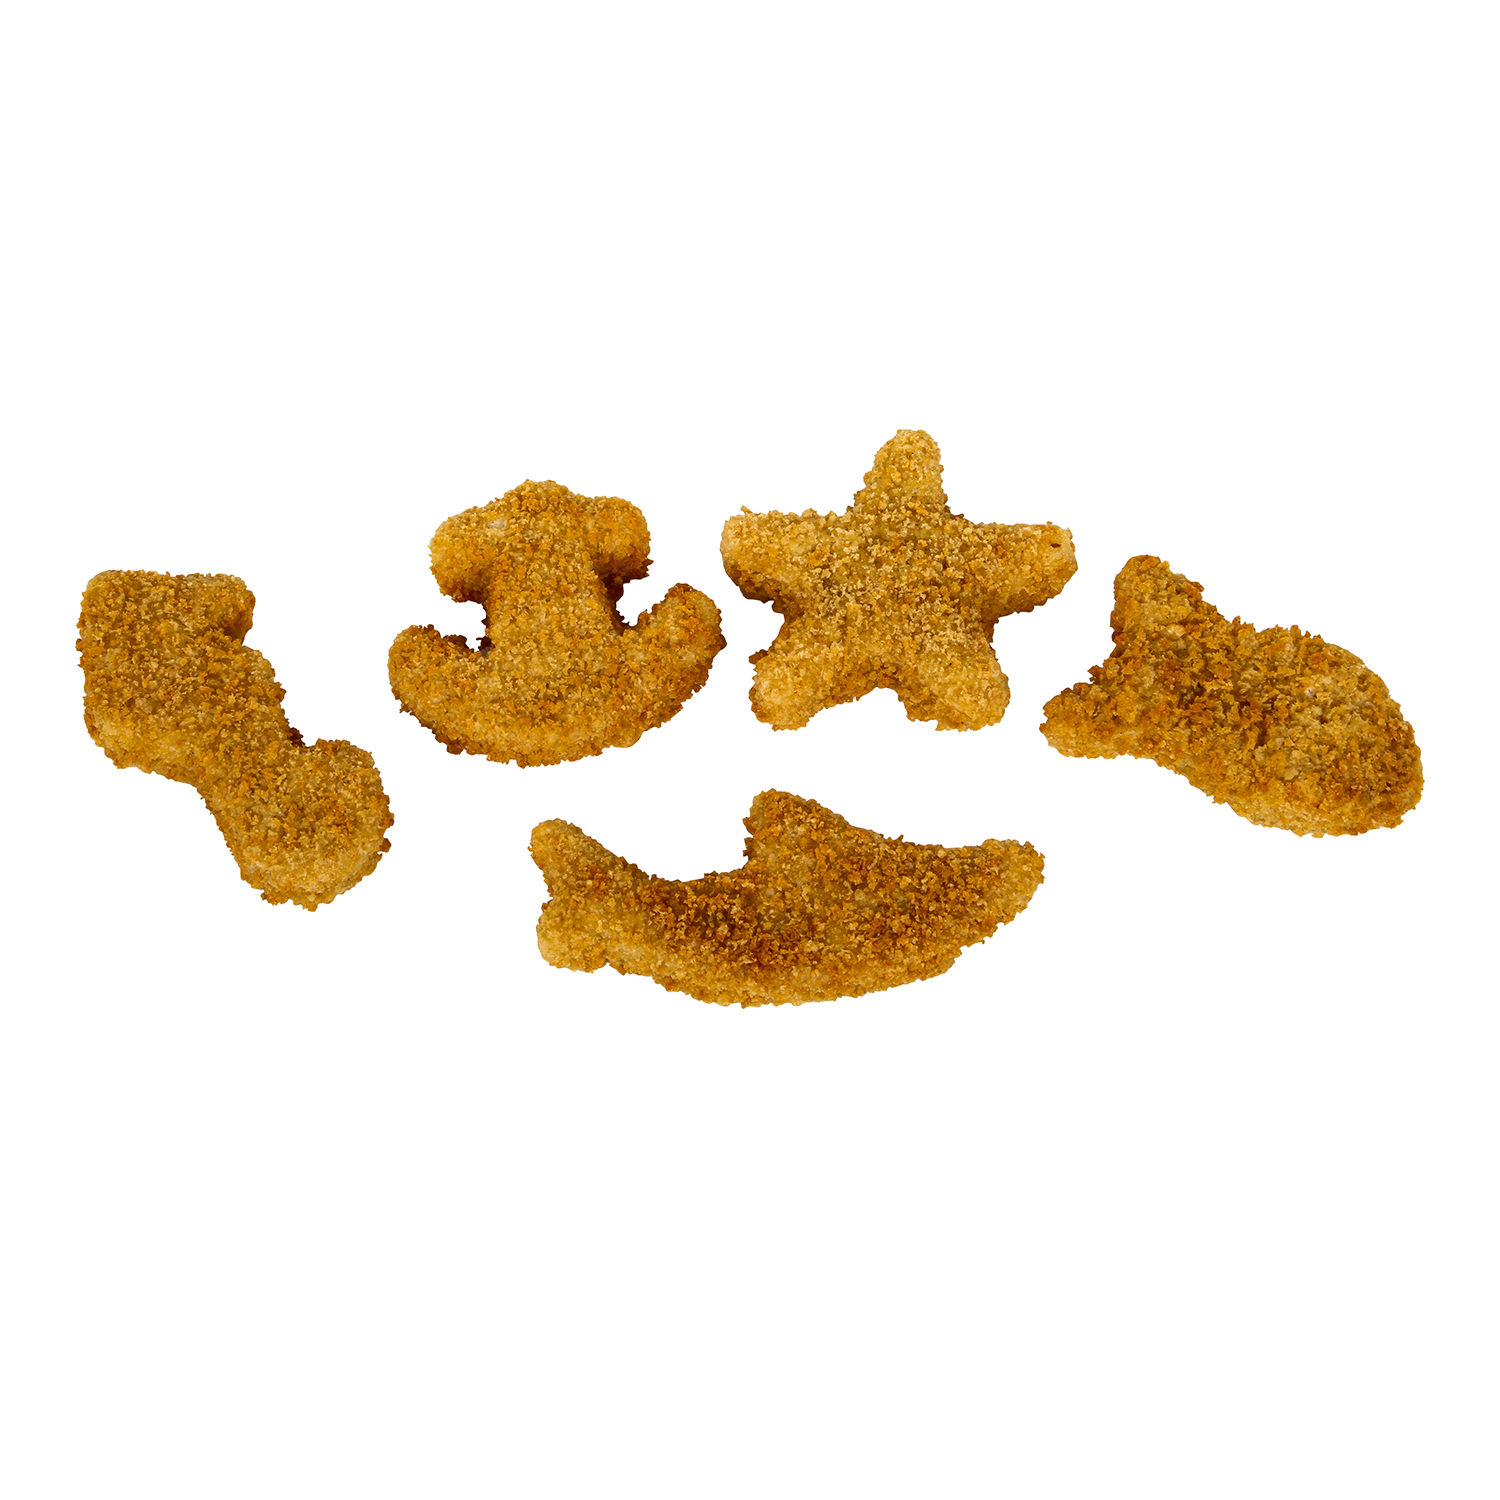 1 Oz Wg Breaded Ak Pollock Fish Shapes Cn High Liner Foods Single Source For Seafood In Foodservice